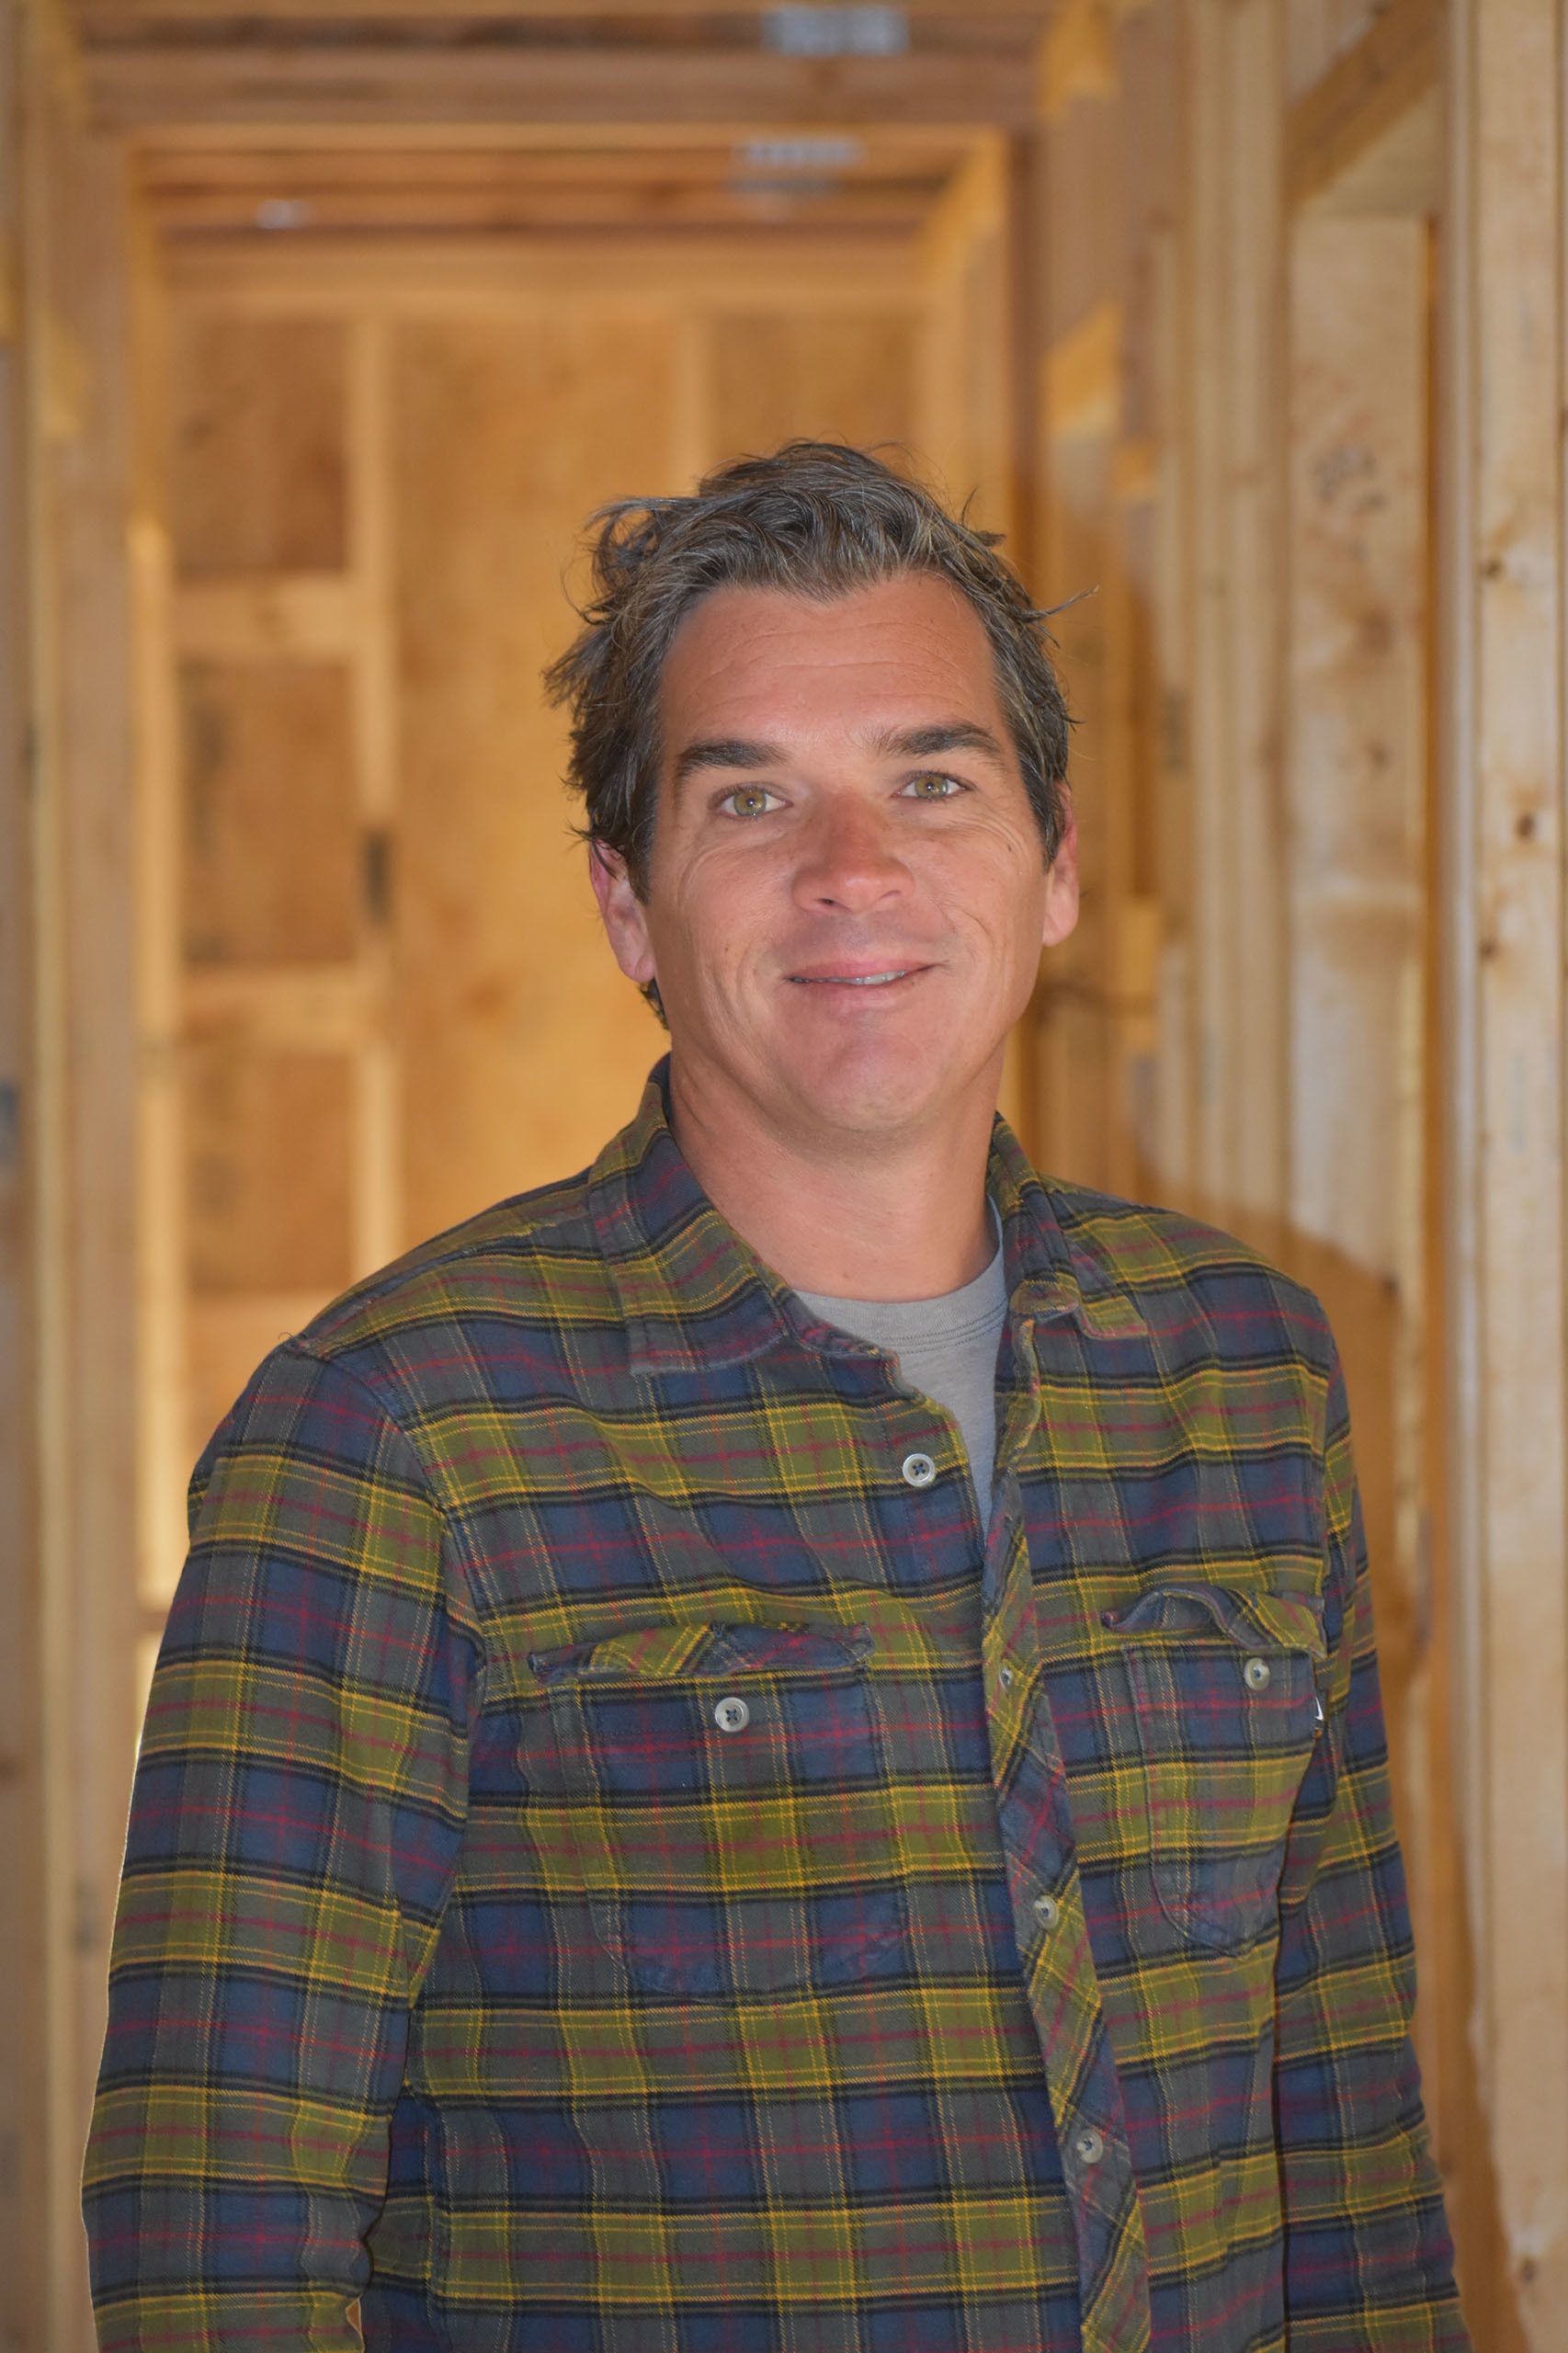 Meet Chris Mastandrea: The Man Who Builds the Homes